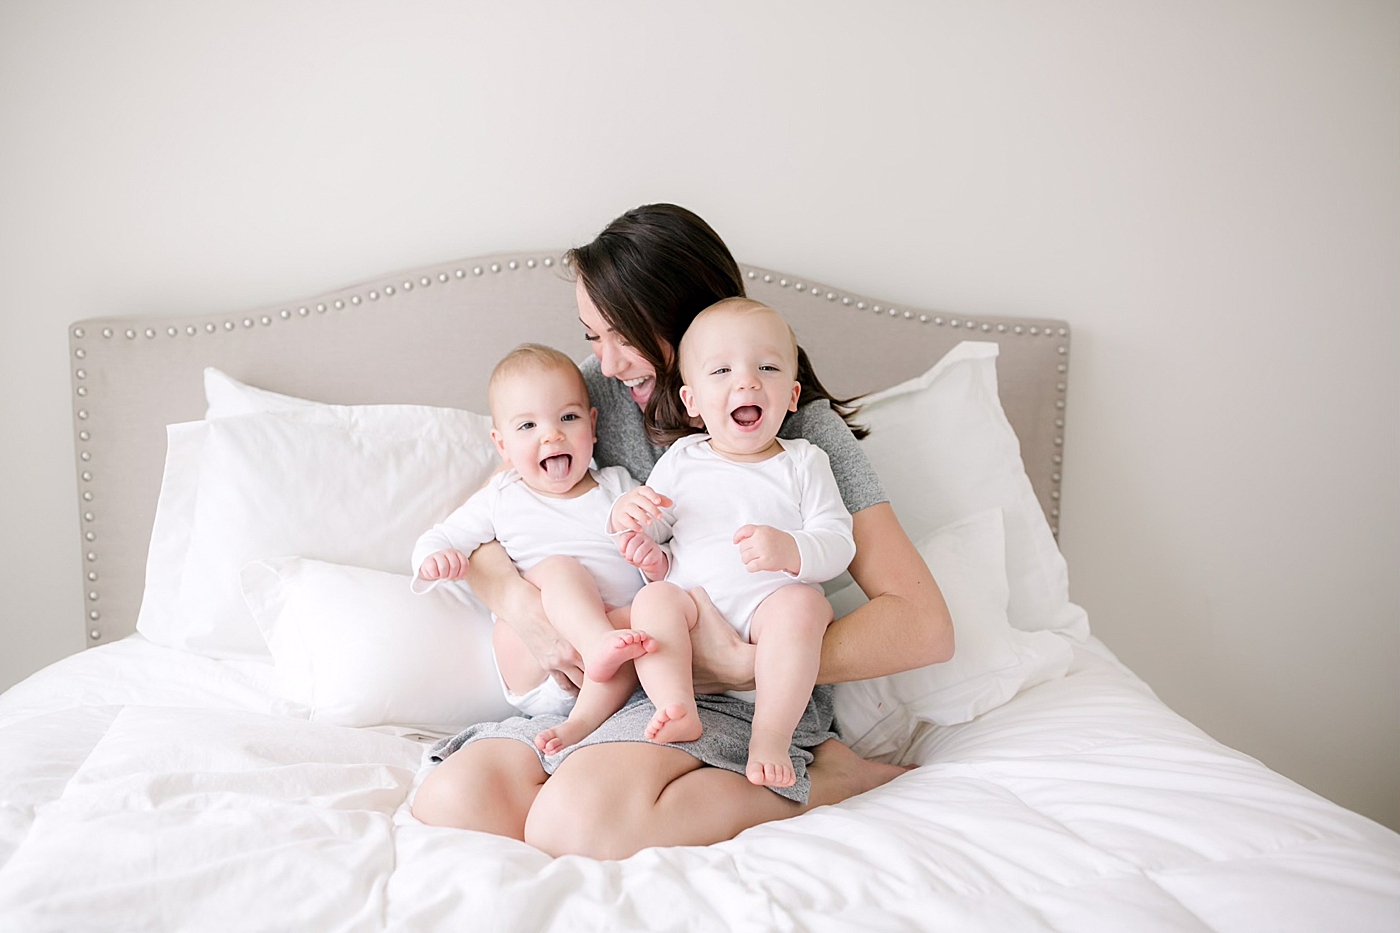 Mom snuggling with her twin babies | Image by Emily Gerald Photography